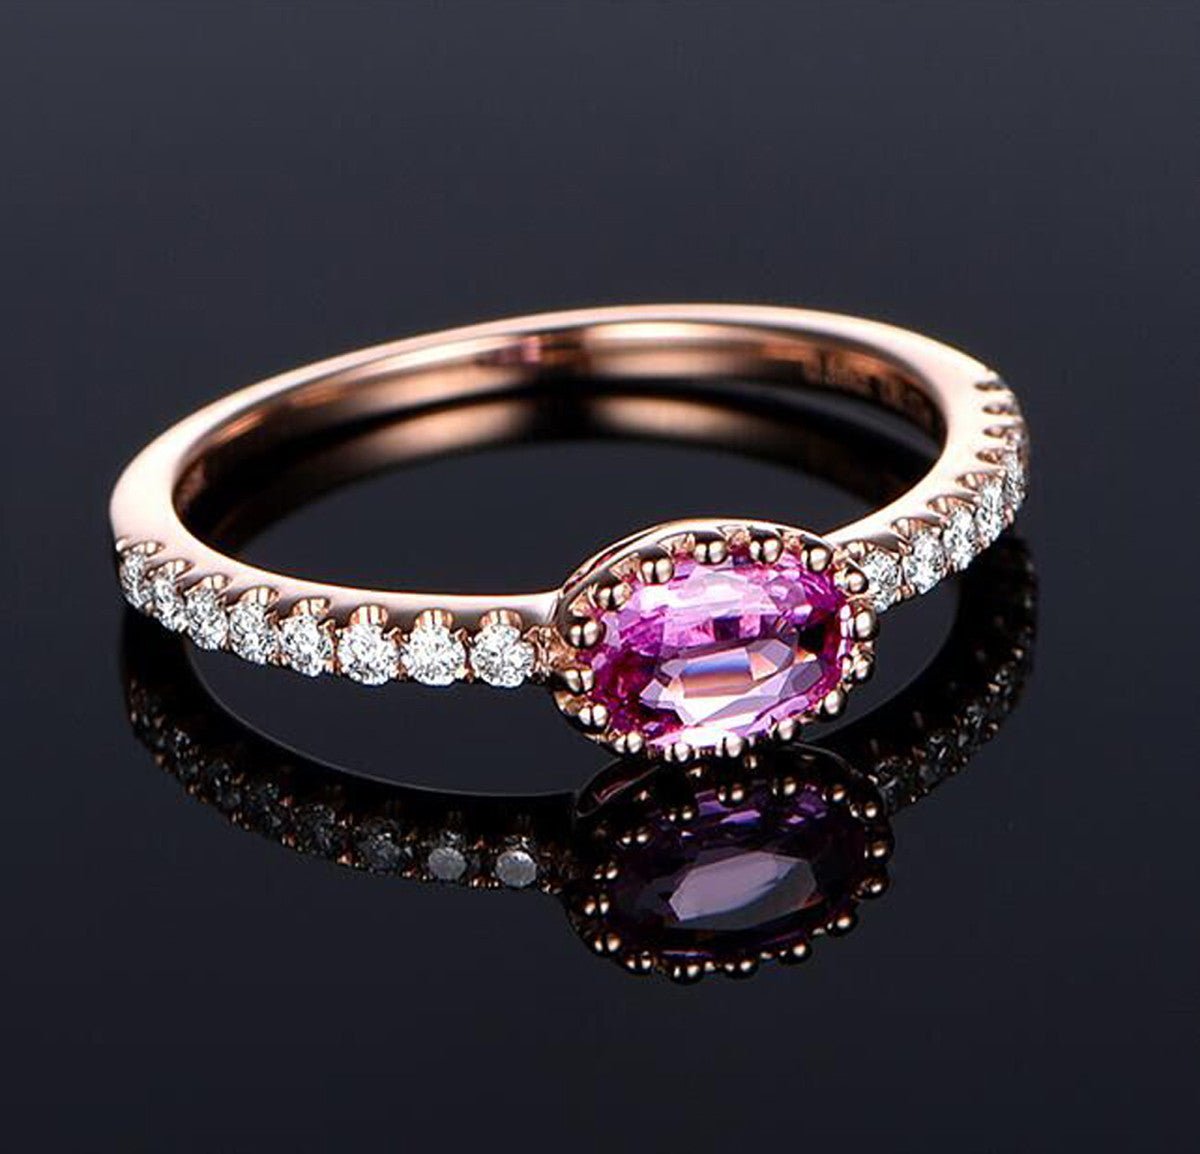 East-West Oval Pink Sapphire Diamond Engagement Ring - Lord of Gem Rings